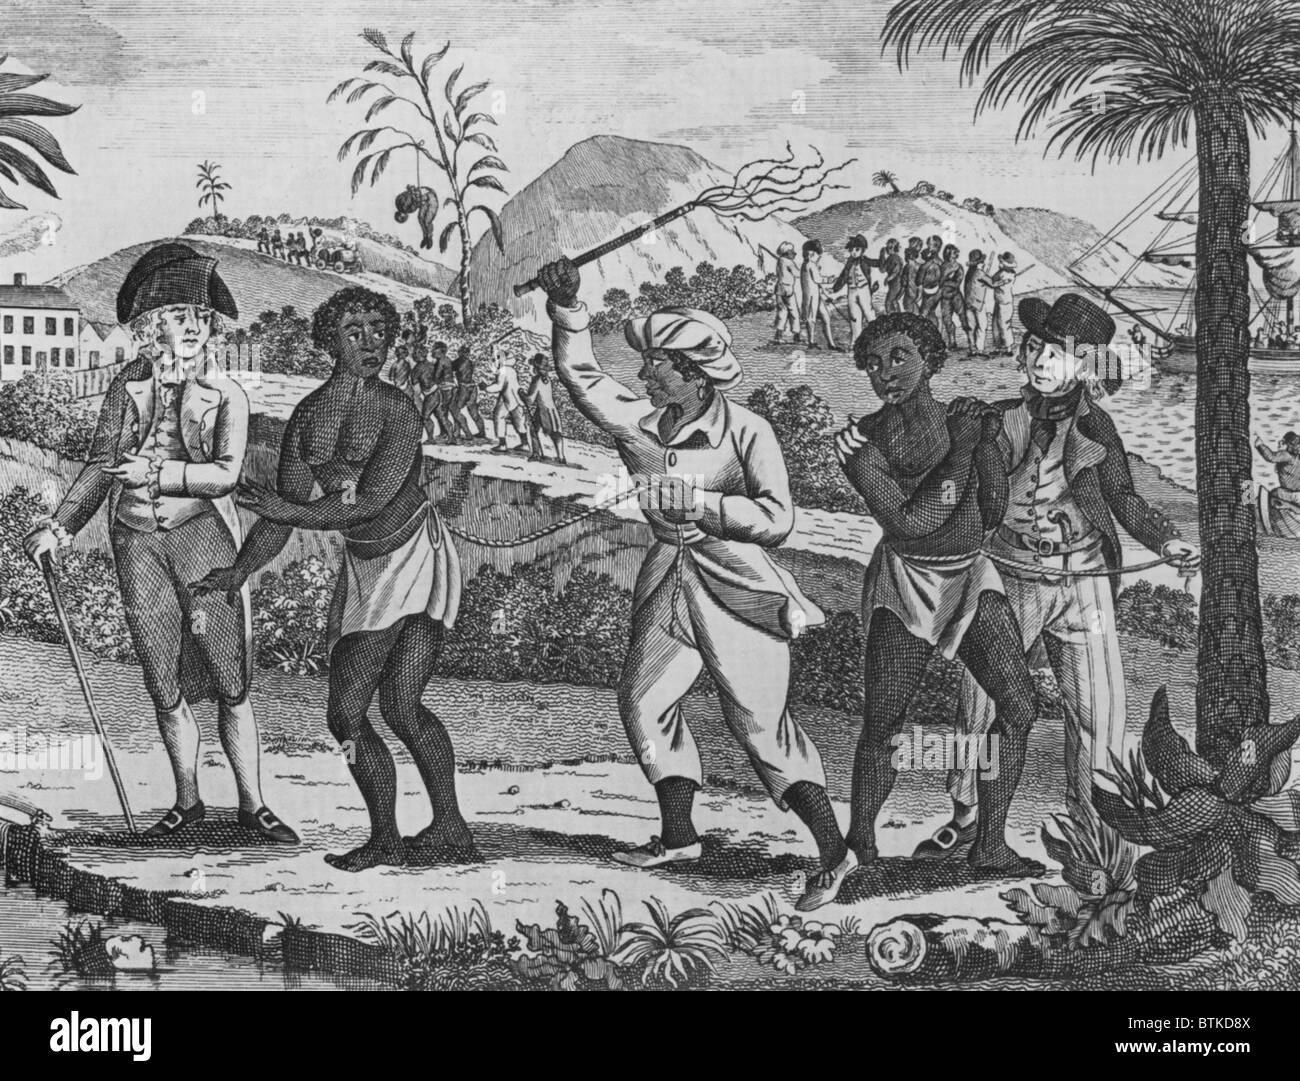 Newly arrived African captives for the Caribbean slave trade. In the foreground a women is whipped. Several groups of newly arrived slaves are leaving the port area in coffles as they start life in a new land. Late 18th century engraving. Stock Photo